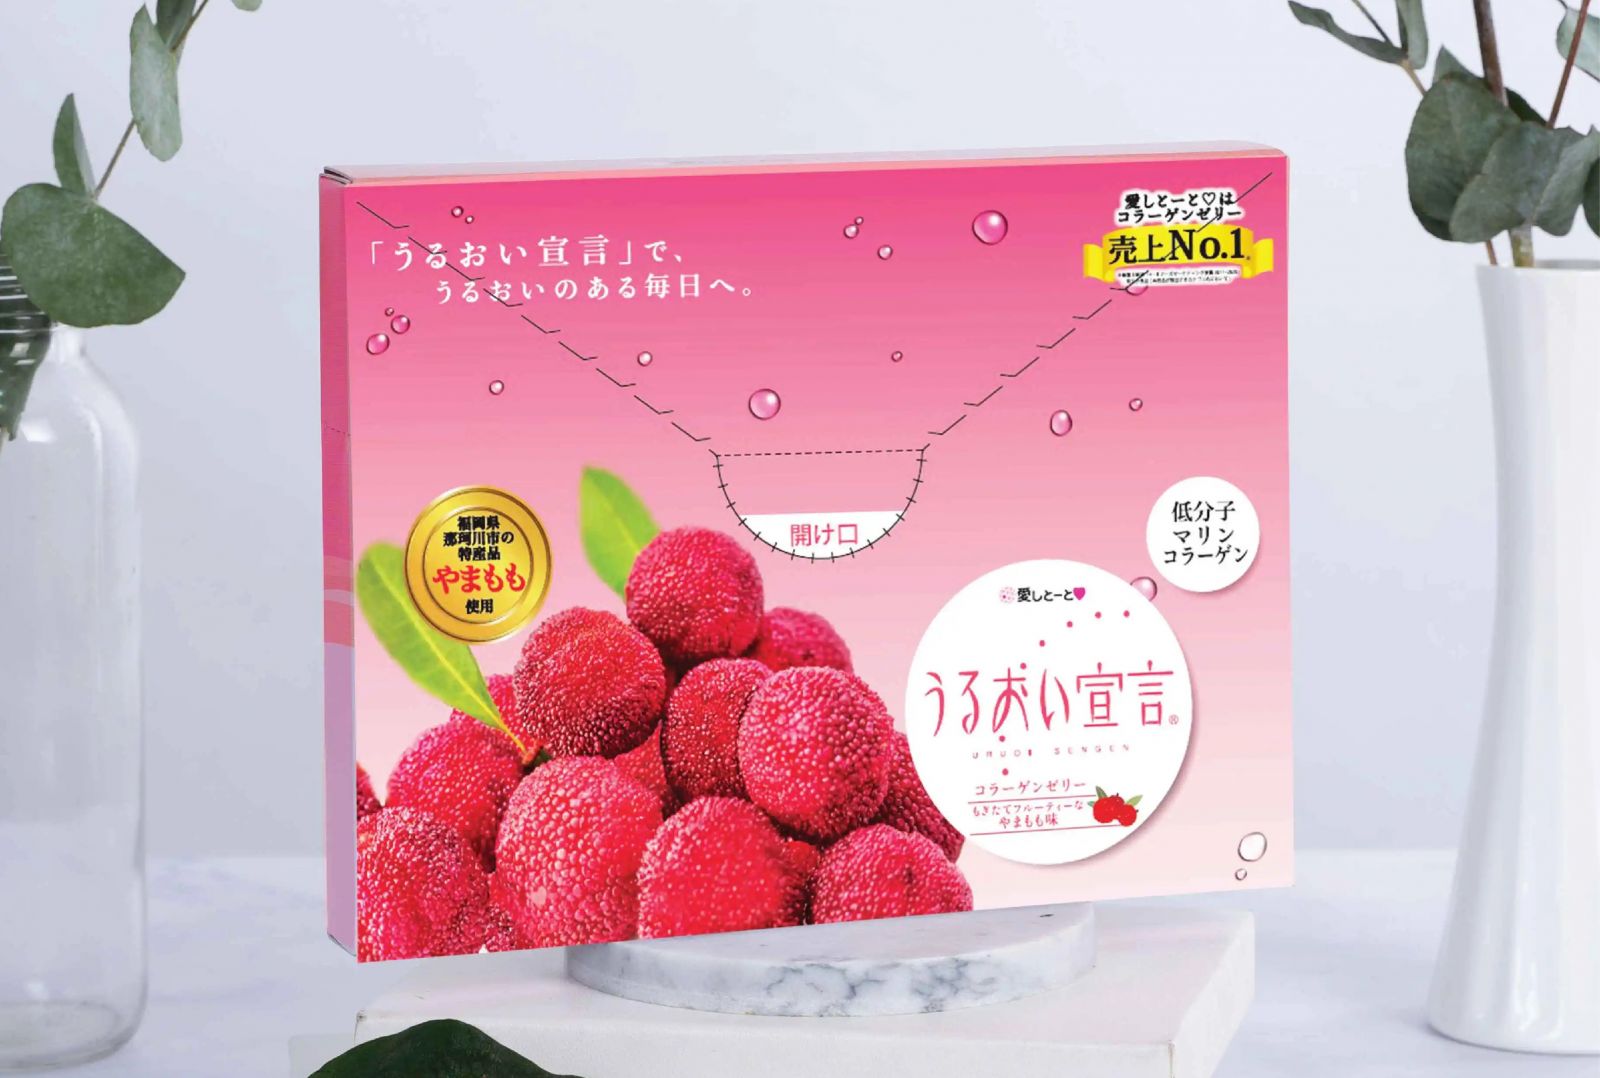 Review Chi Tiết Thạch Collagen Aishitoto Collagen Jelly Nhật Bản. Ảnh 5